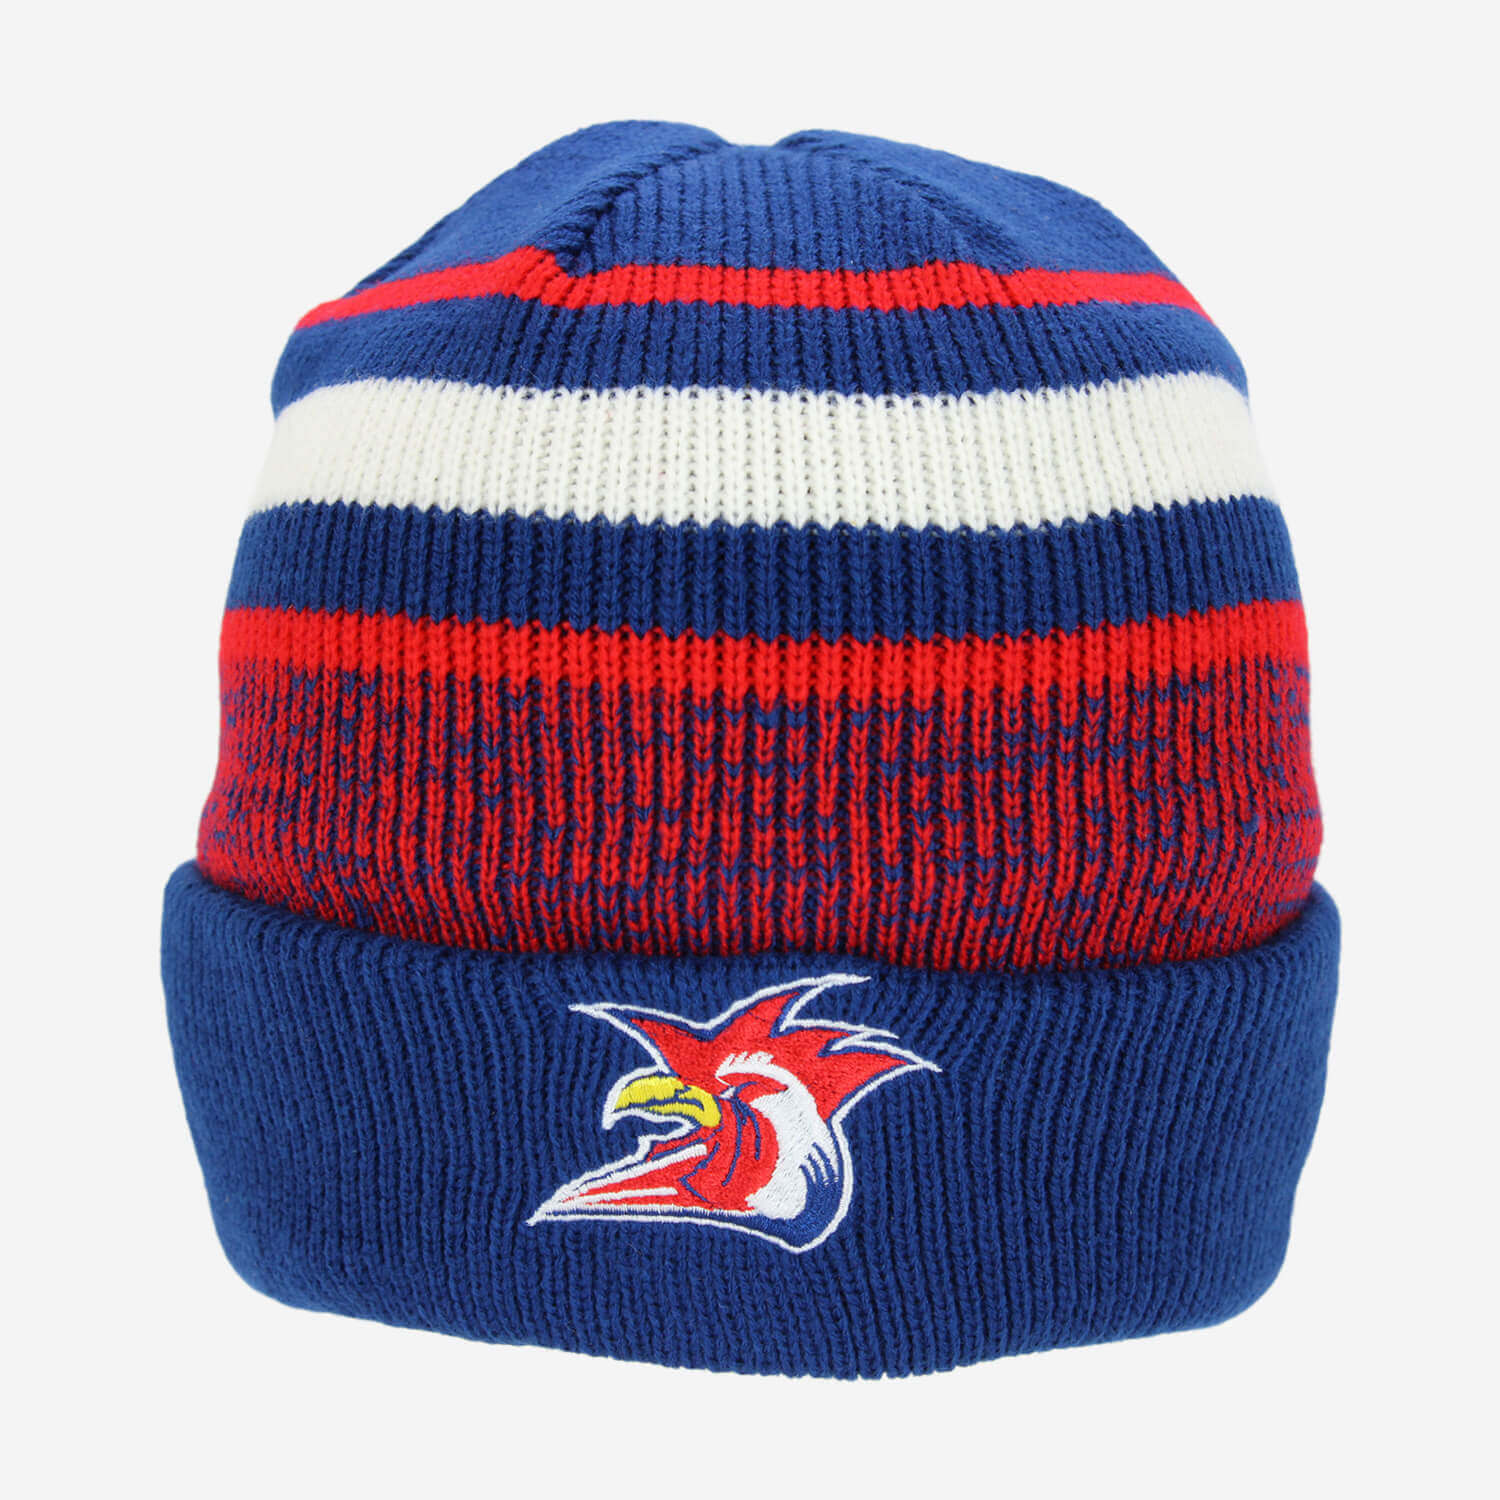 NRL CLUSTER BEANIE_SYDNEY ROOSTERS_STUBBY CLUB